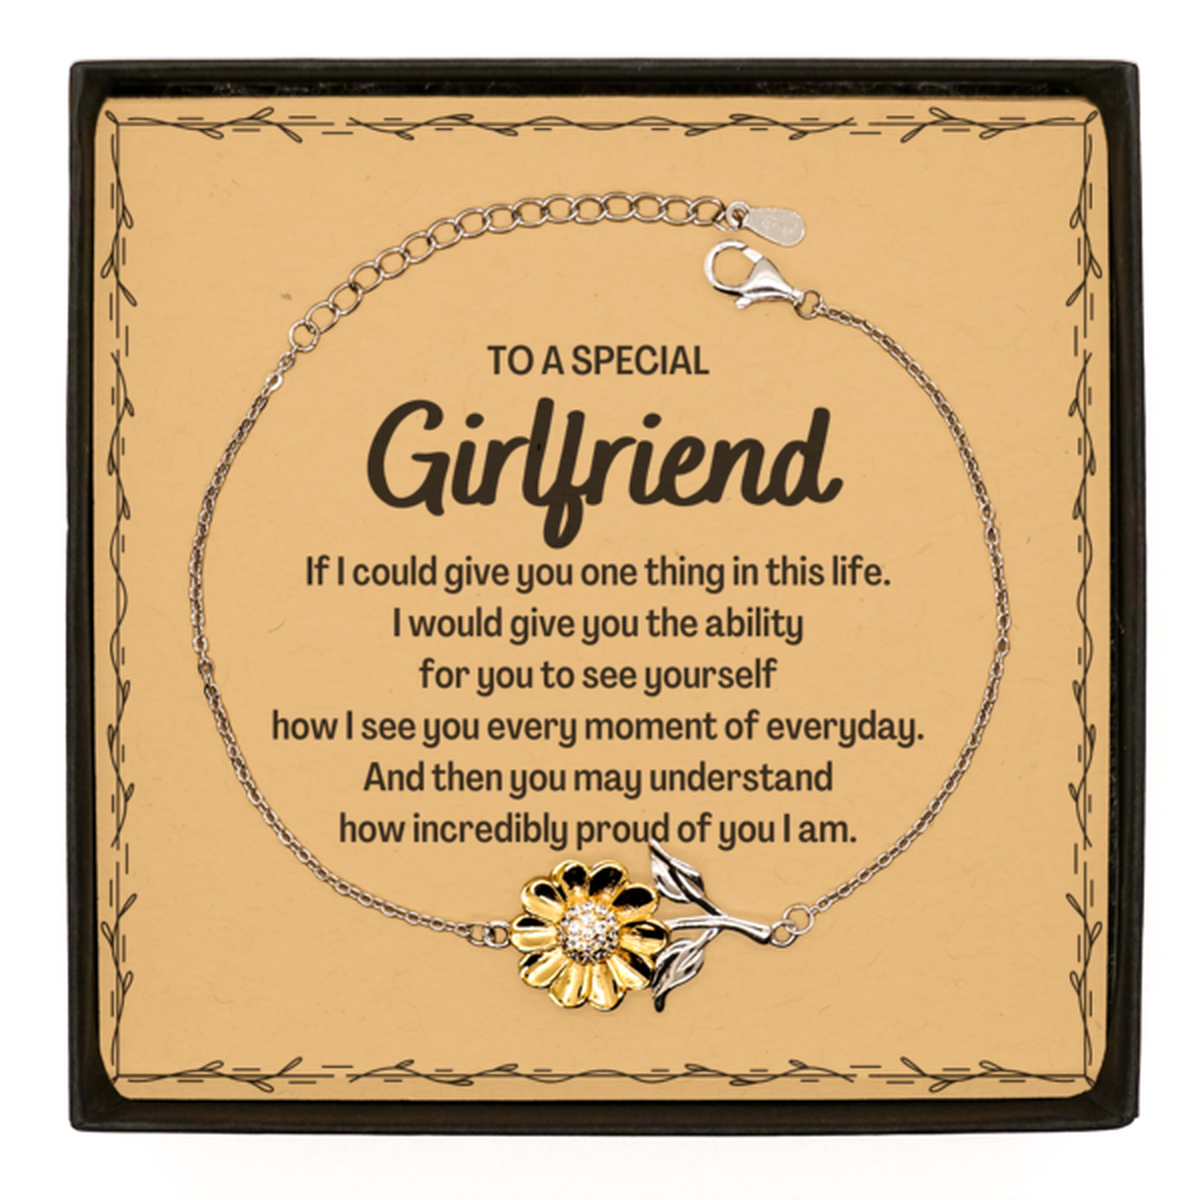 To My Girlfriend Sunflower Bracelet, Gifts For Girlfriend Message Card, Inspirational Gifts for Christmas Birthday, Epic Gifts for Girlfriend To A Special Girlfriend how incredibly proud of you I am